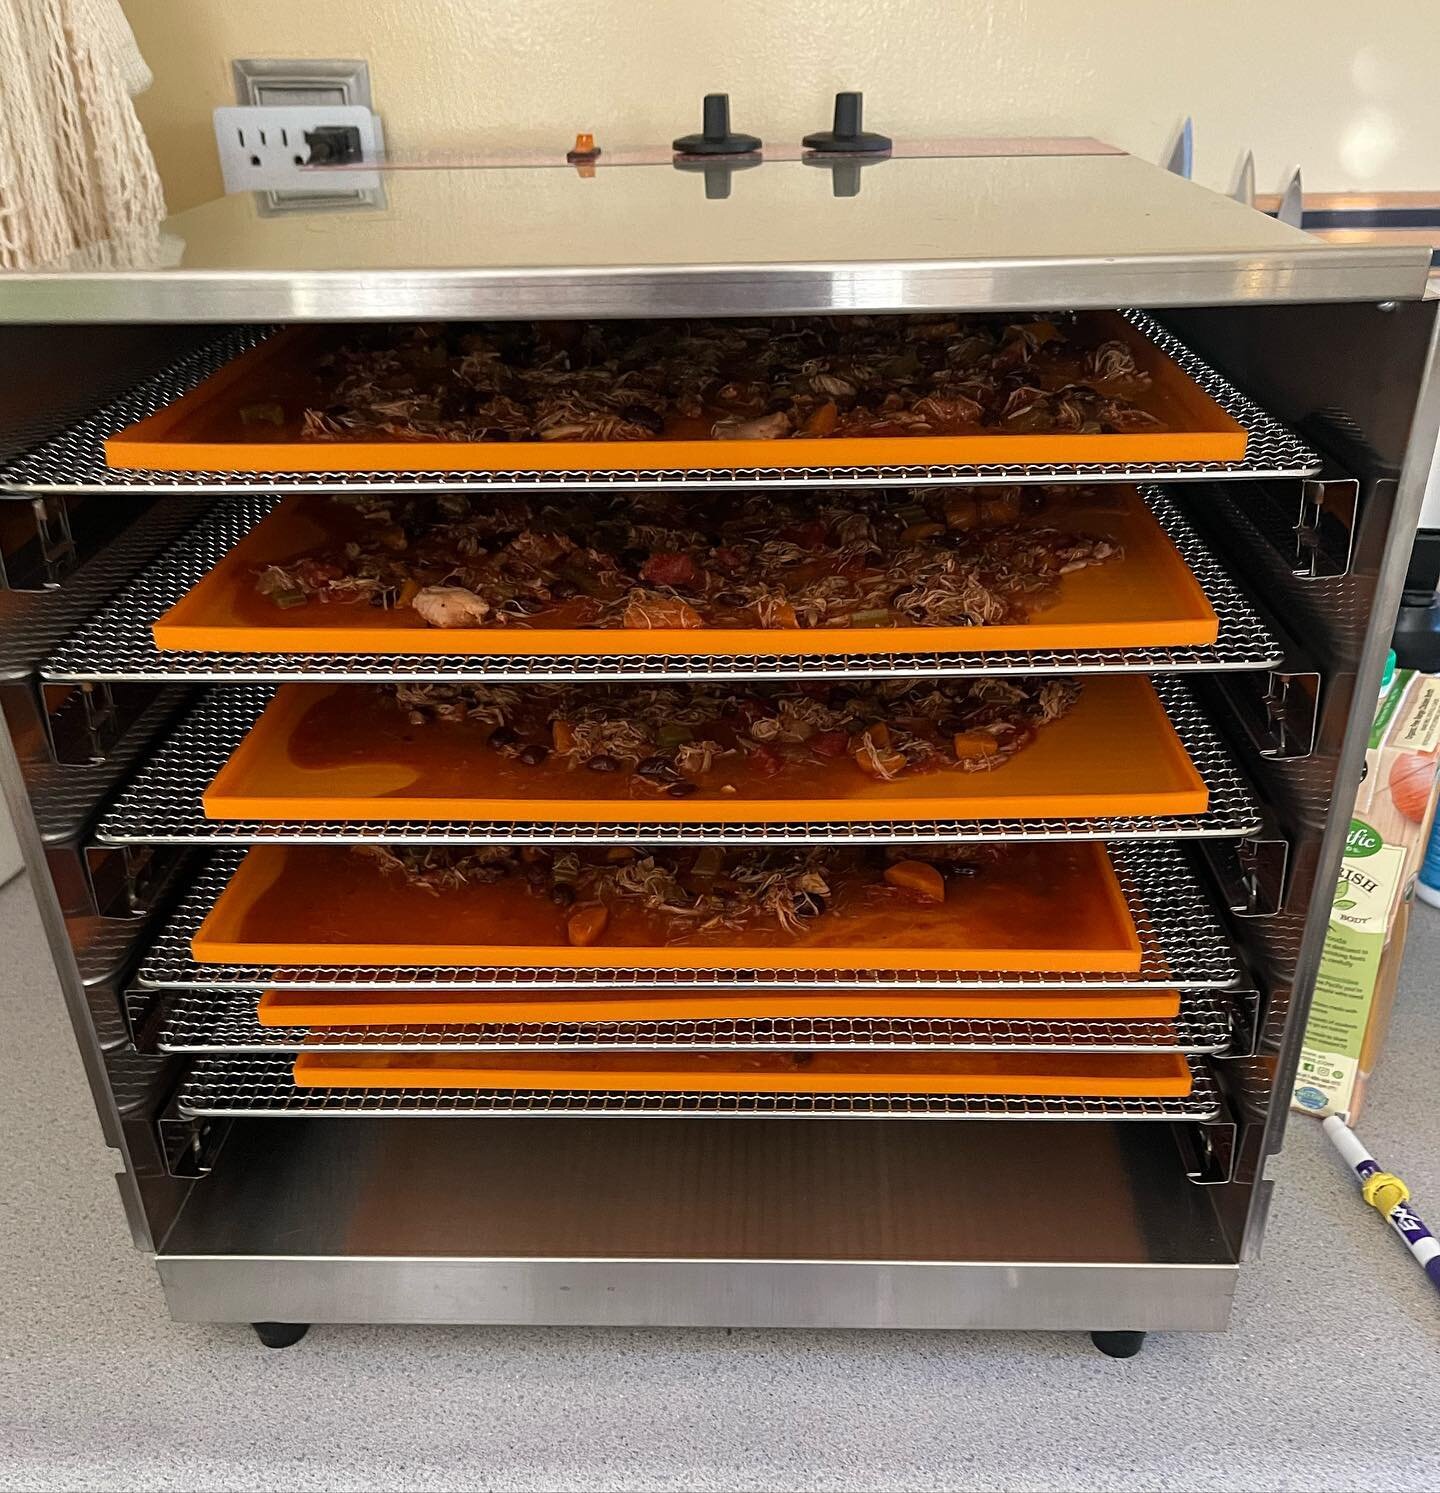 Camping level up! Jon got me a big dehydrator for my birthday, so easier camping meals are on the way! Tonight I'm dehydrating chicken tortilla soup. When it's done, I'll pack and seal it in air tight bags. When it's time to eat, we heat up water and